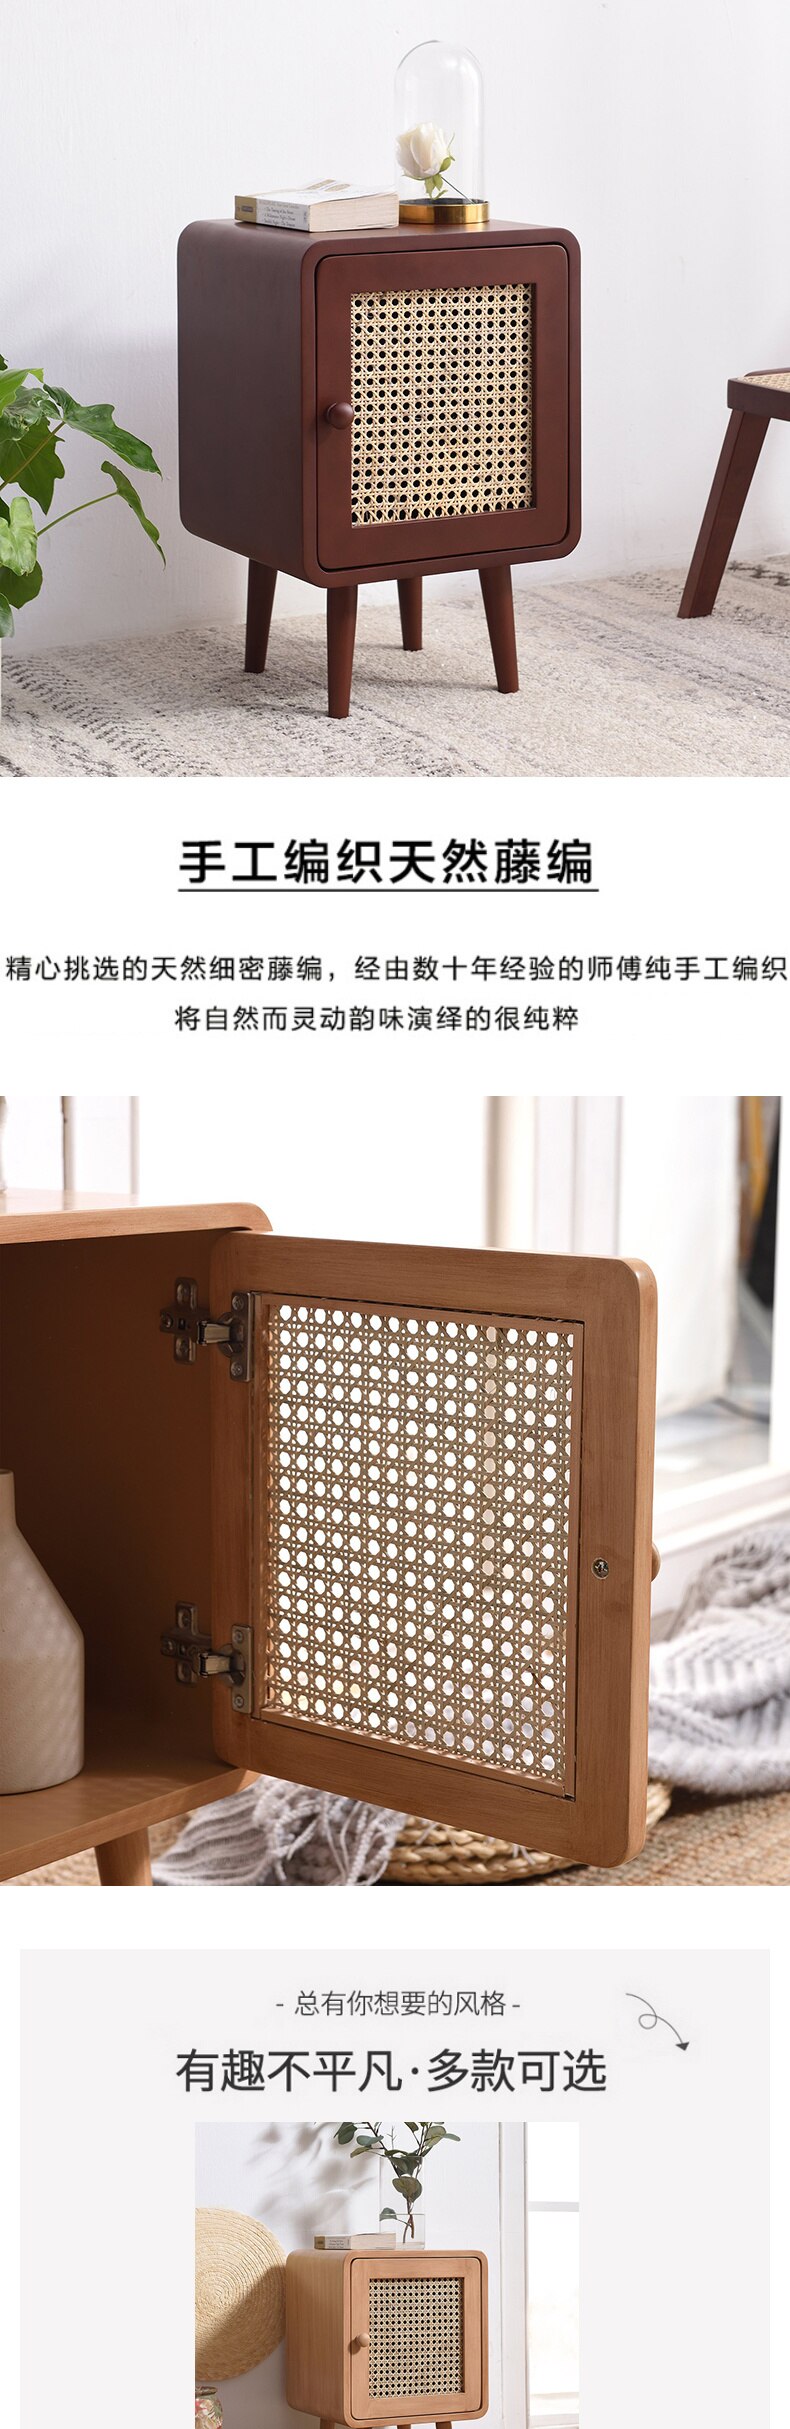 Wooden Furniture Coffee Tables Living Room Furniture Sofa Side Table Rattan Weaving Bedside Table Bedroom Small Storage Cabinet